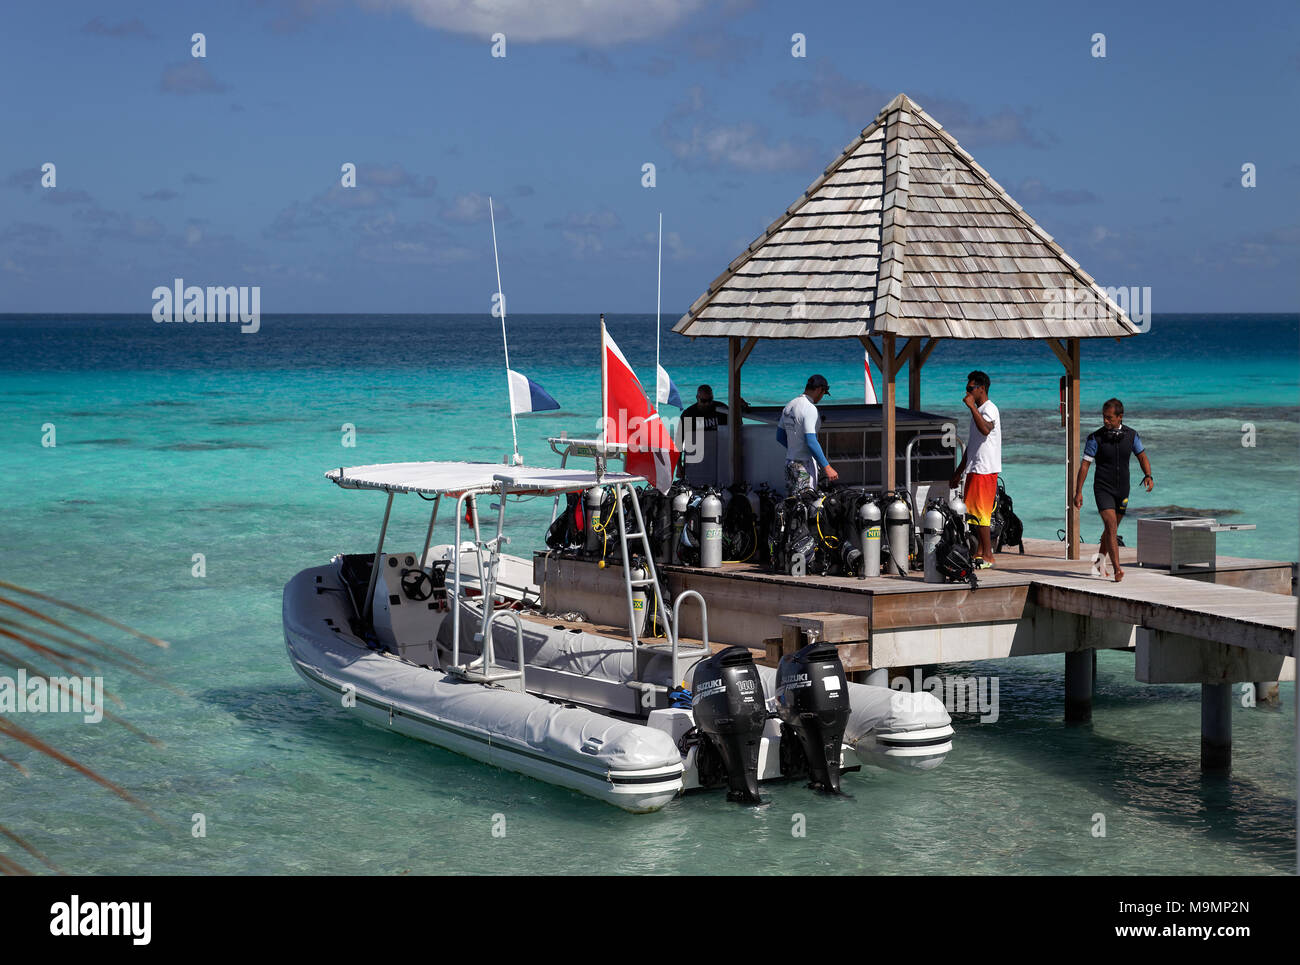 Top Dive Center, Divers preparing to dive, Inflatable Boat at the pier, Diving equipment, Sea, Pacific Ocean Stock Photo